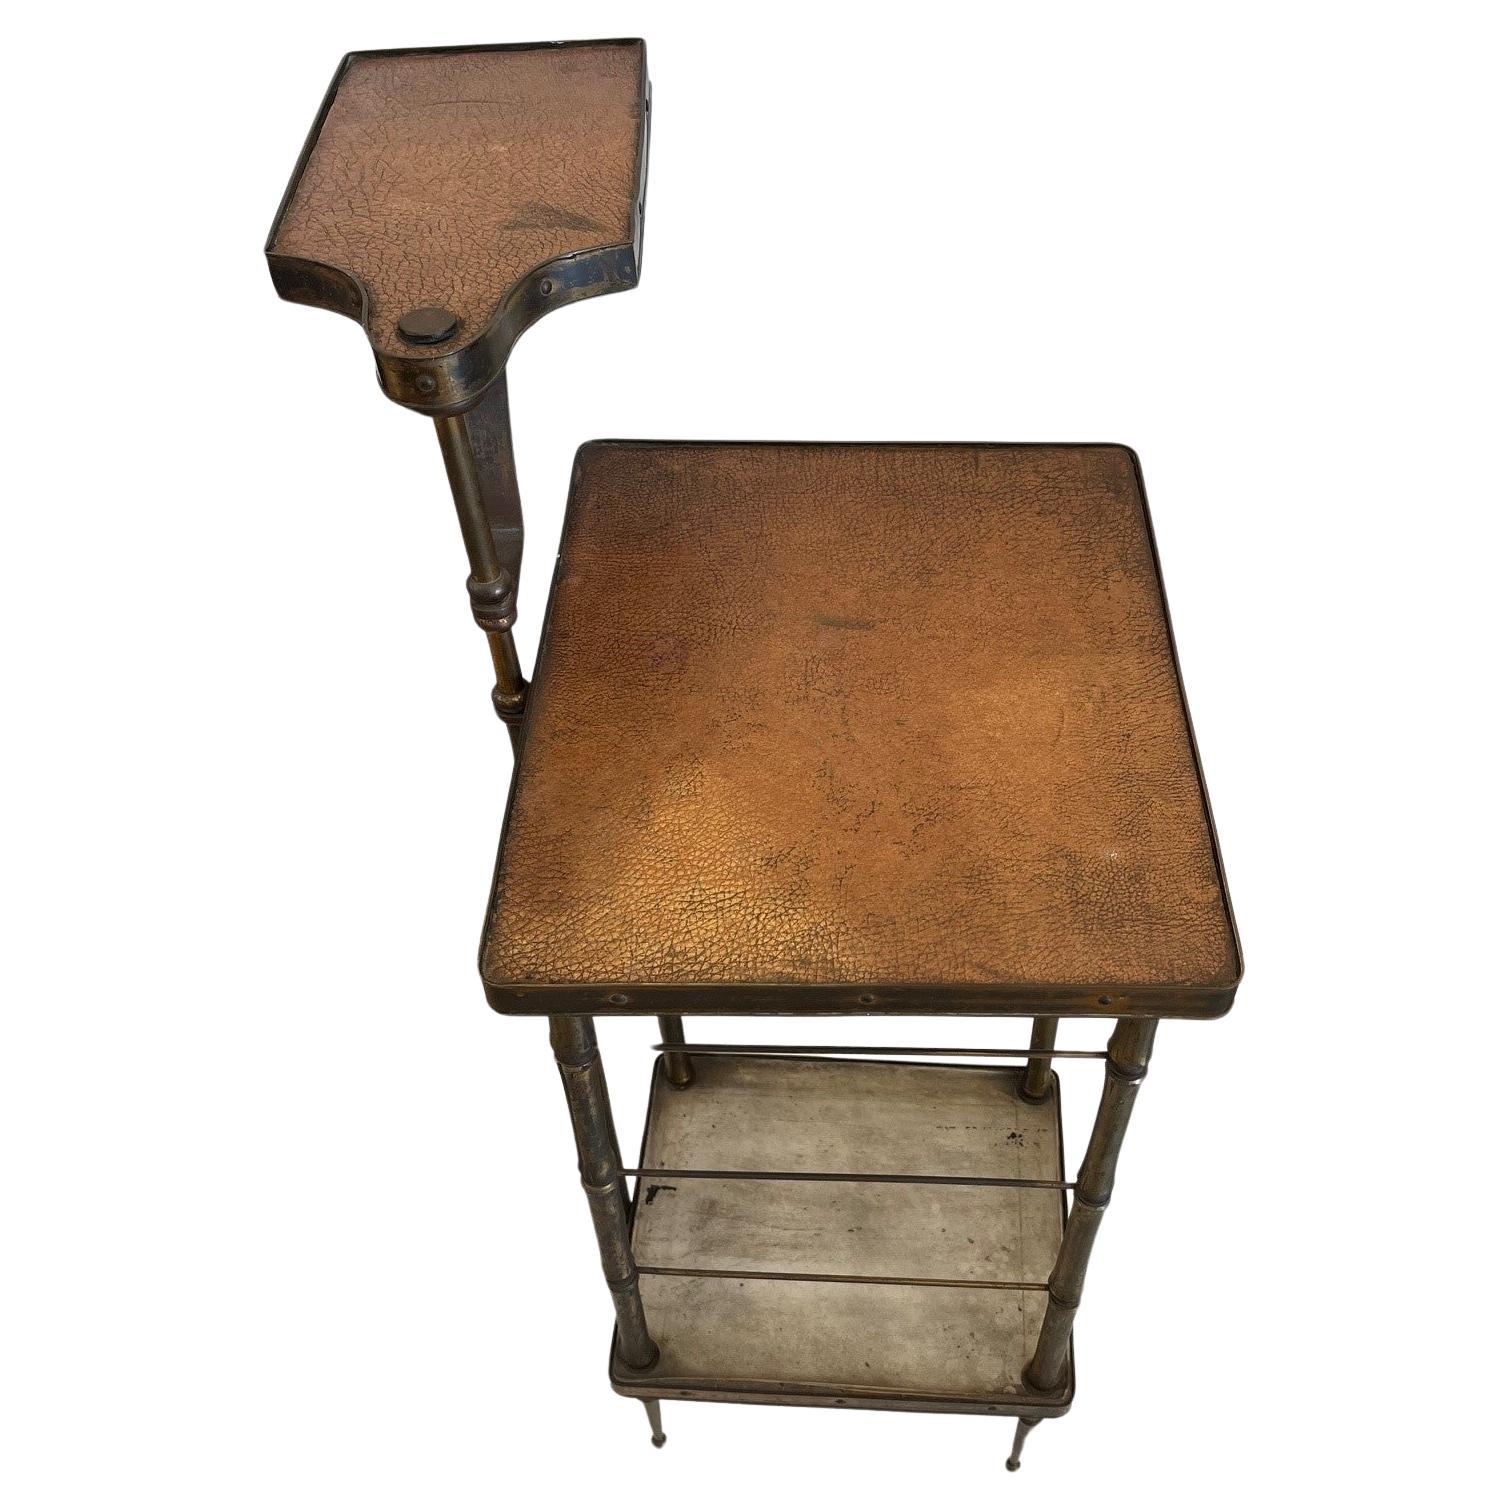 Vintage Leather Top Table with Swing Arm Tray